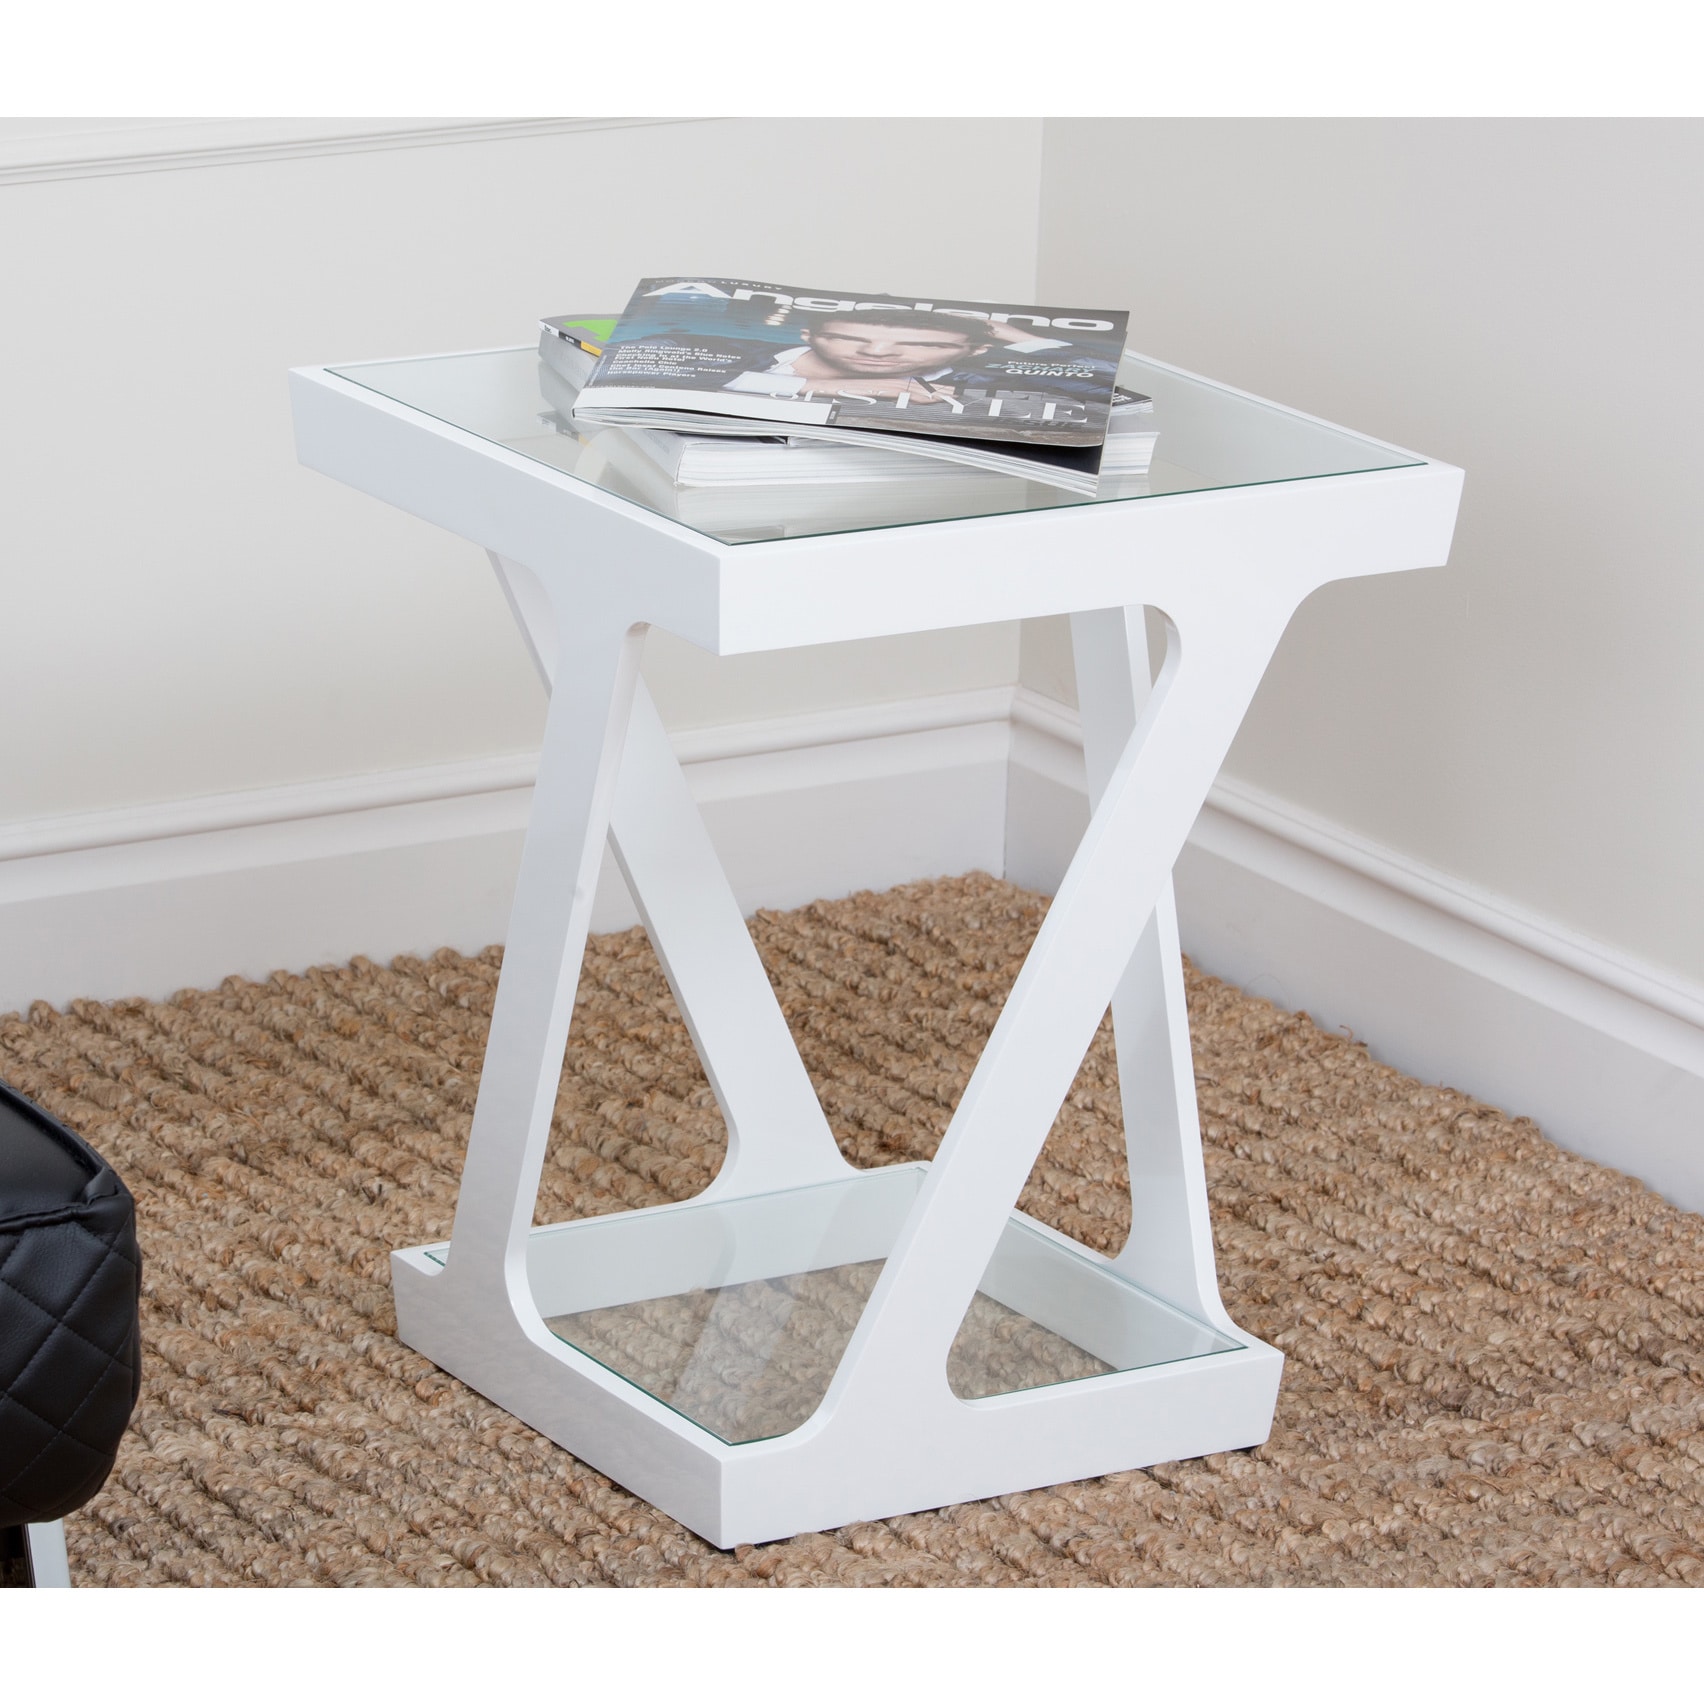 Zen Glass End Table Today $186.99 Sale $168.29 Save 10%